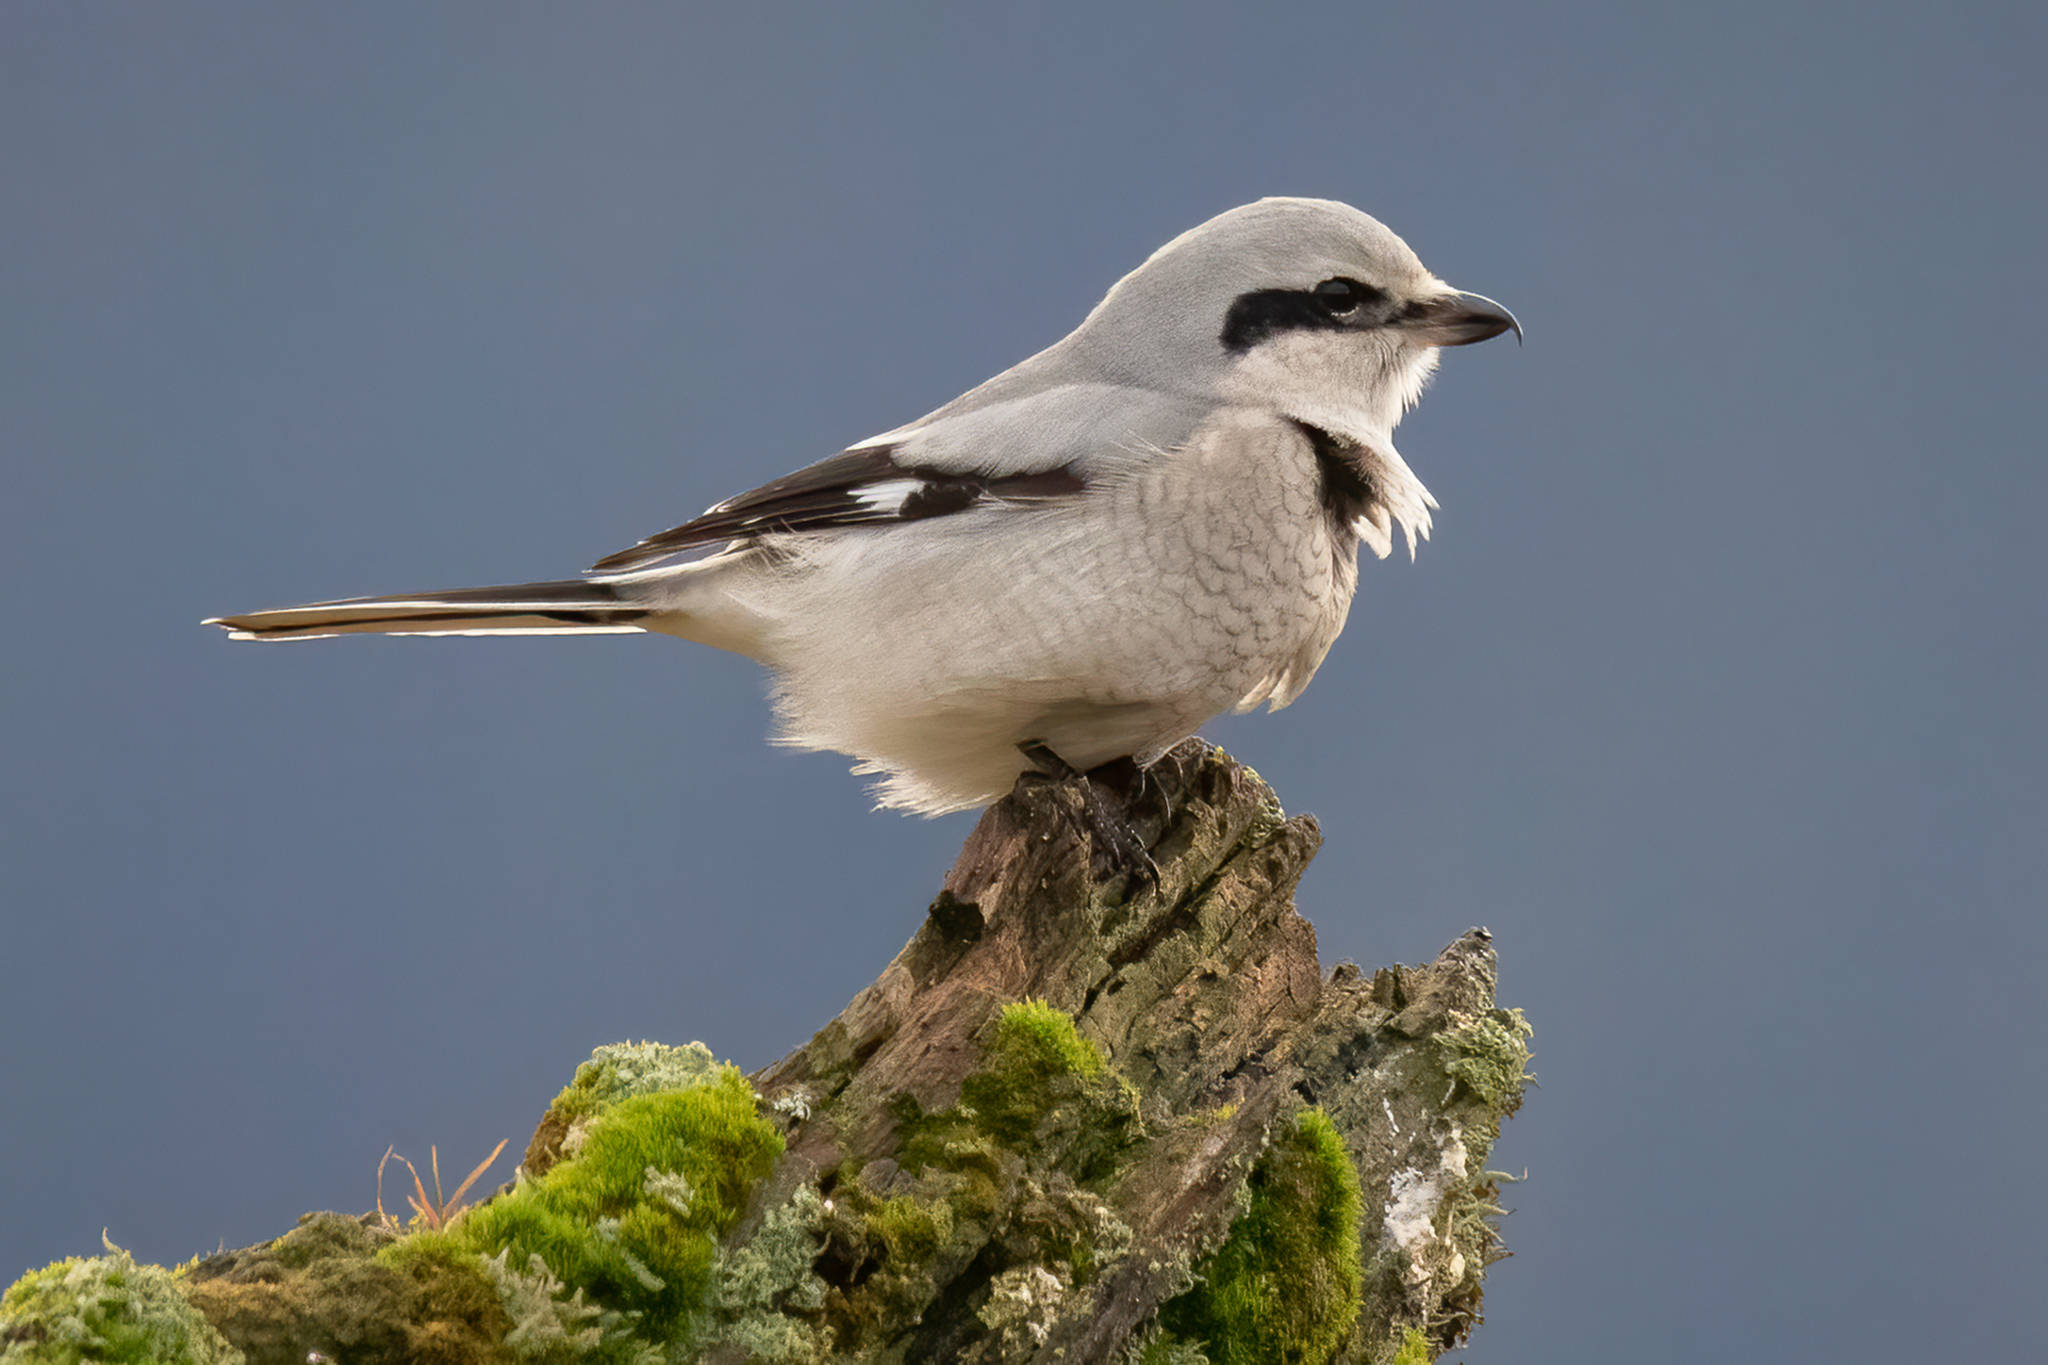 A northern shrike poses on a stump-garden of moss and lichen in the wetlands. Sometimes called "butcher birds," northern shrikes are sizable songbirds that can catch prey larger than themselves (Courtesy Photo / Kerry Howard)